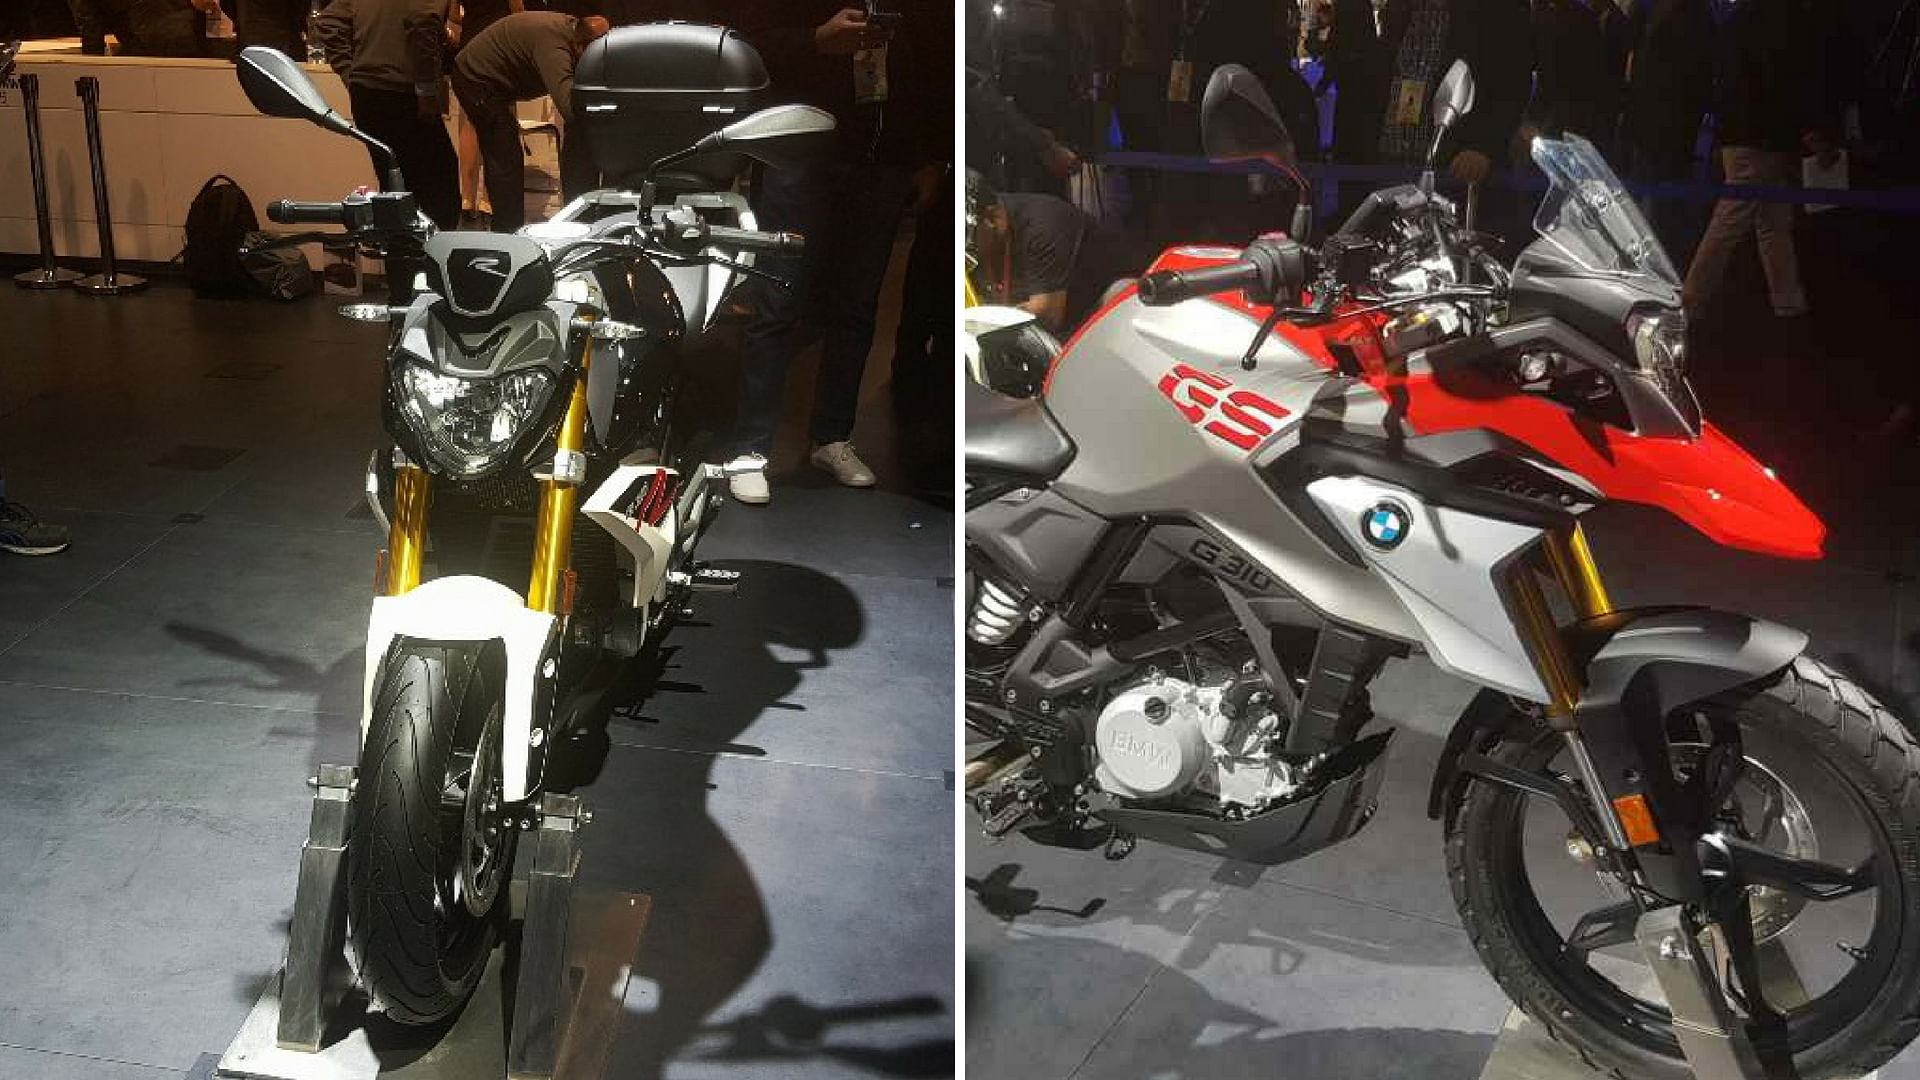 BMW has set the booking amount at Rs 50,000 for both bikes.